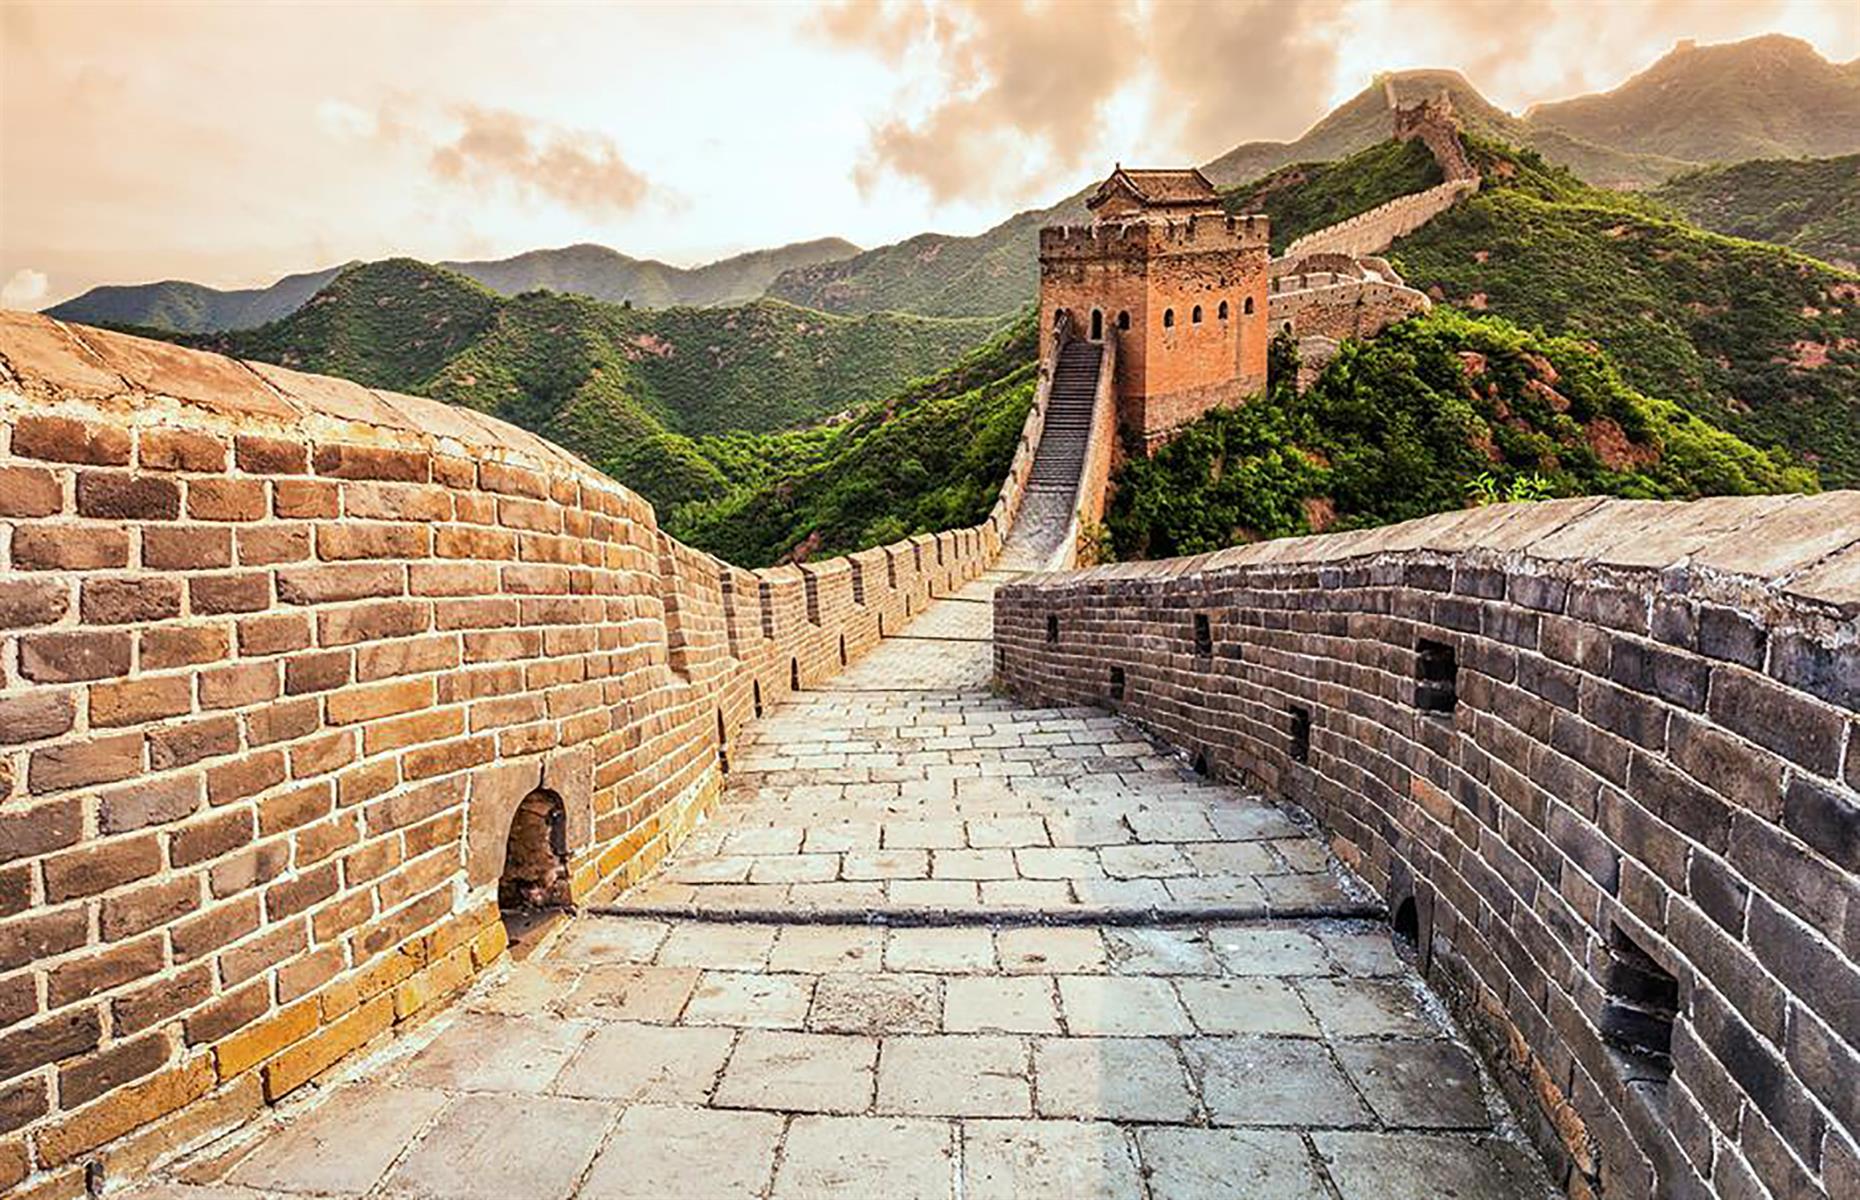 29. The Great Wall of China is just a wall